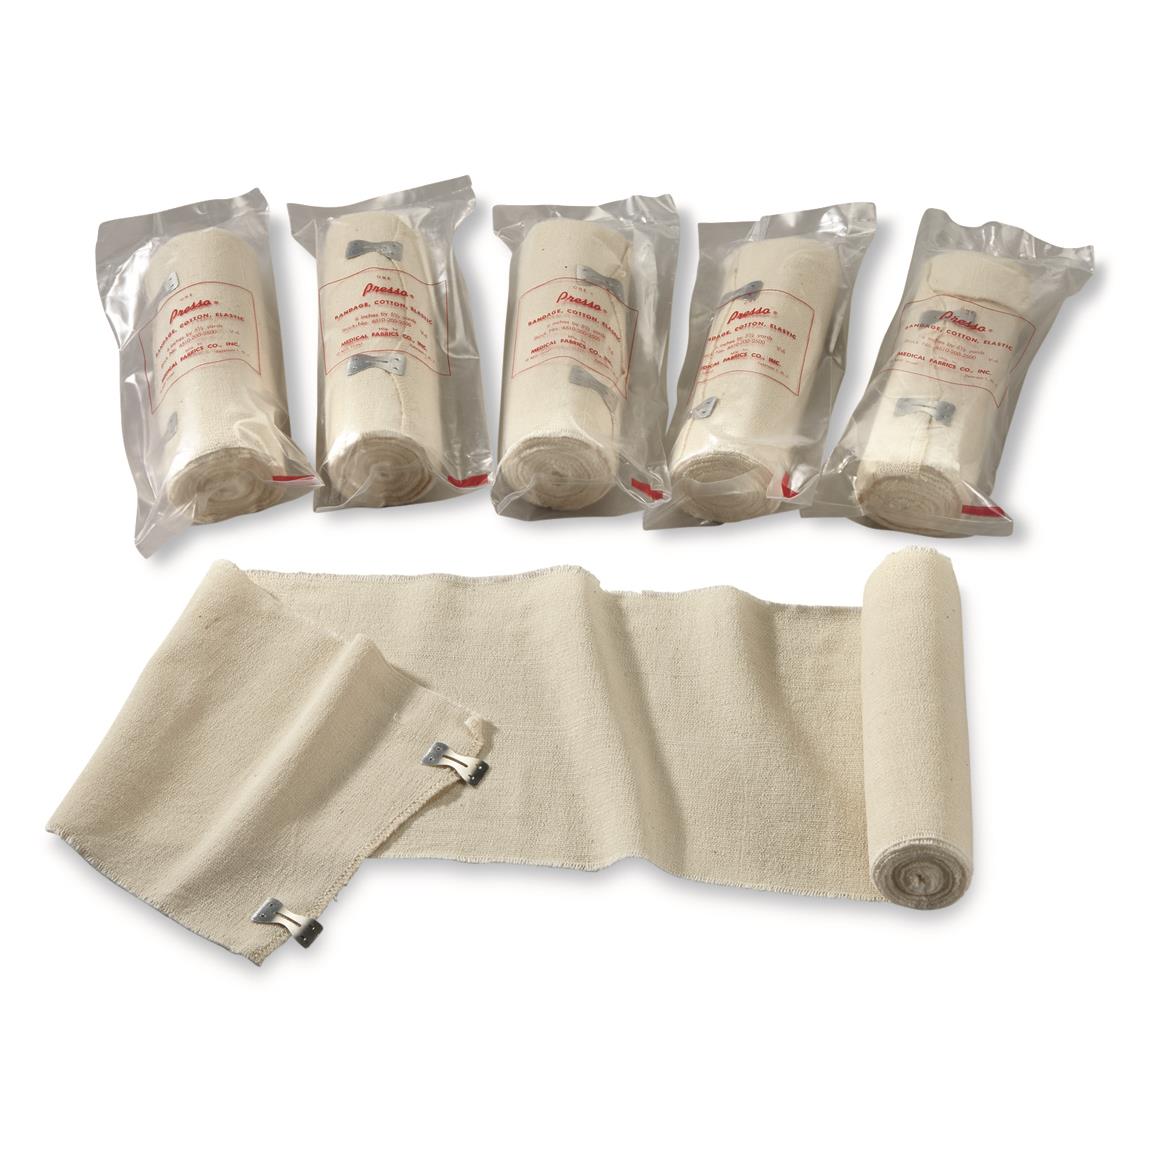 U.S. Military Surplus Rolled Bandages, 6 Pack, New